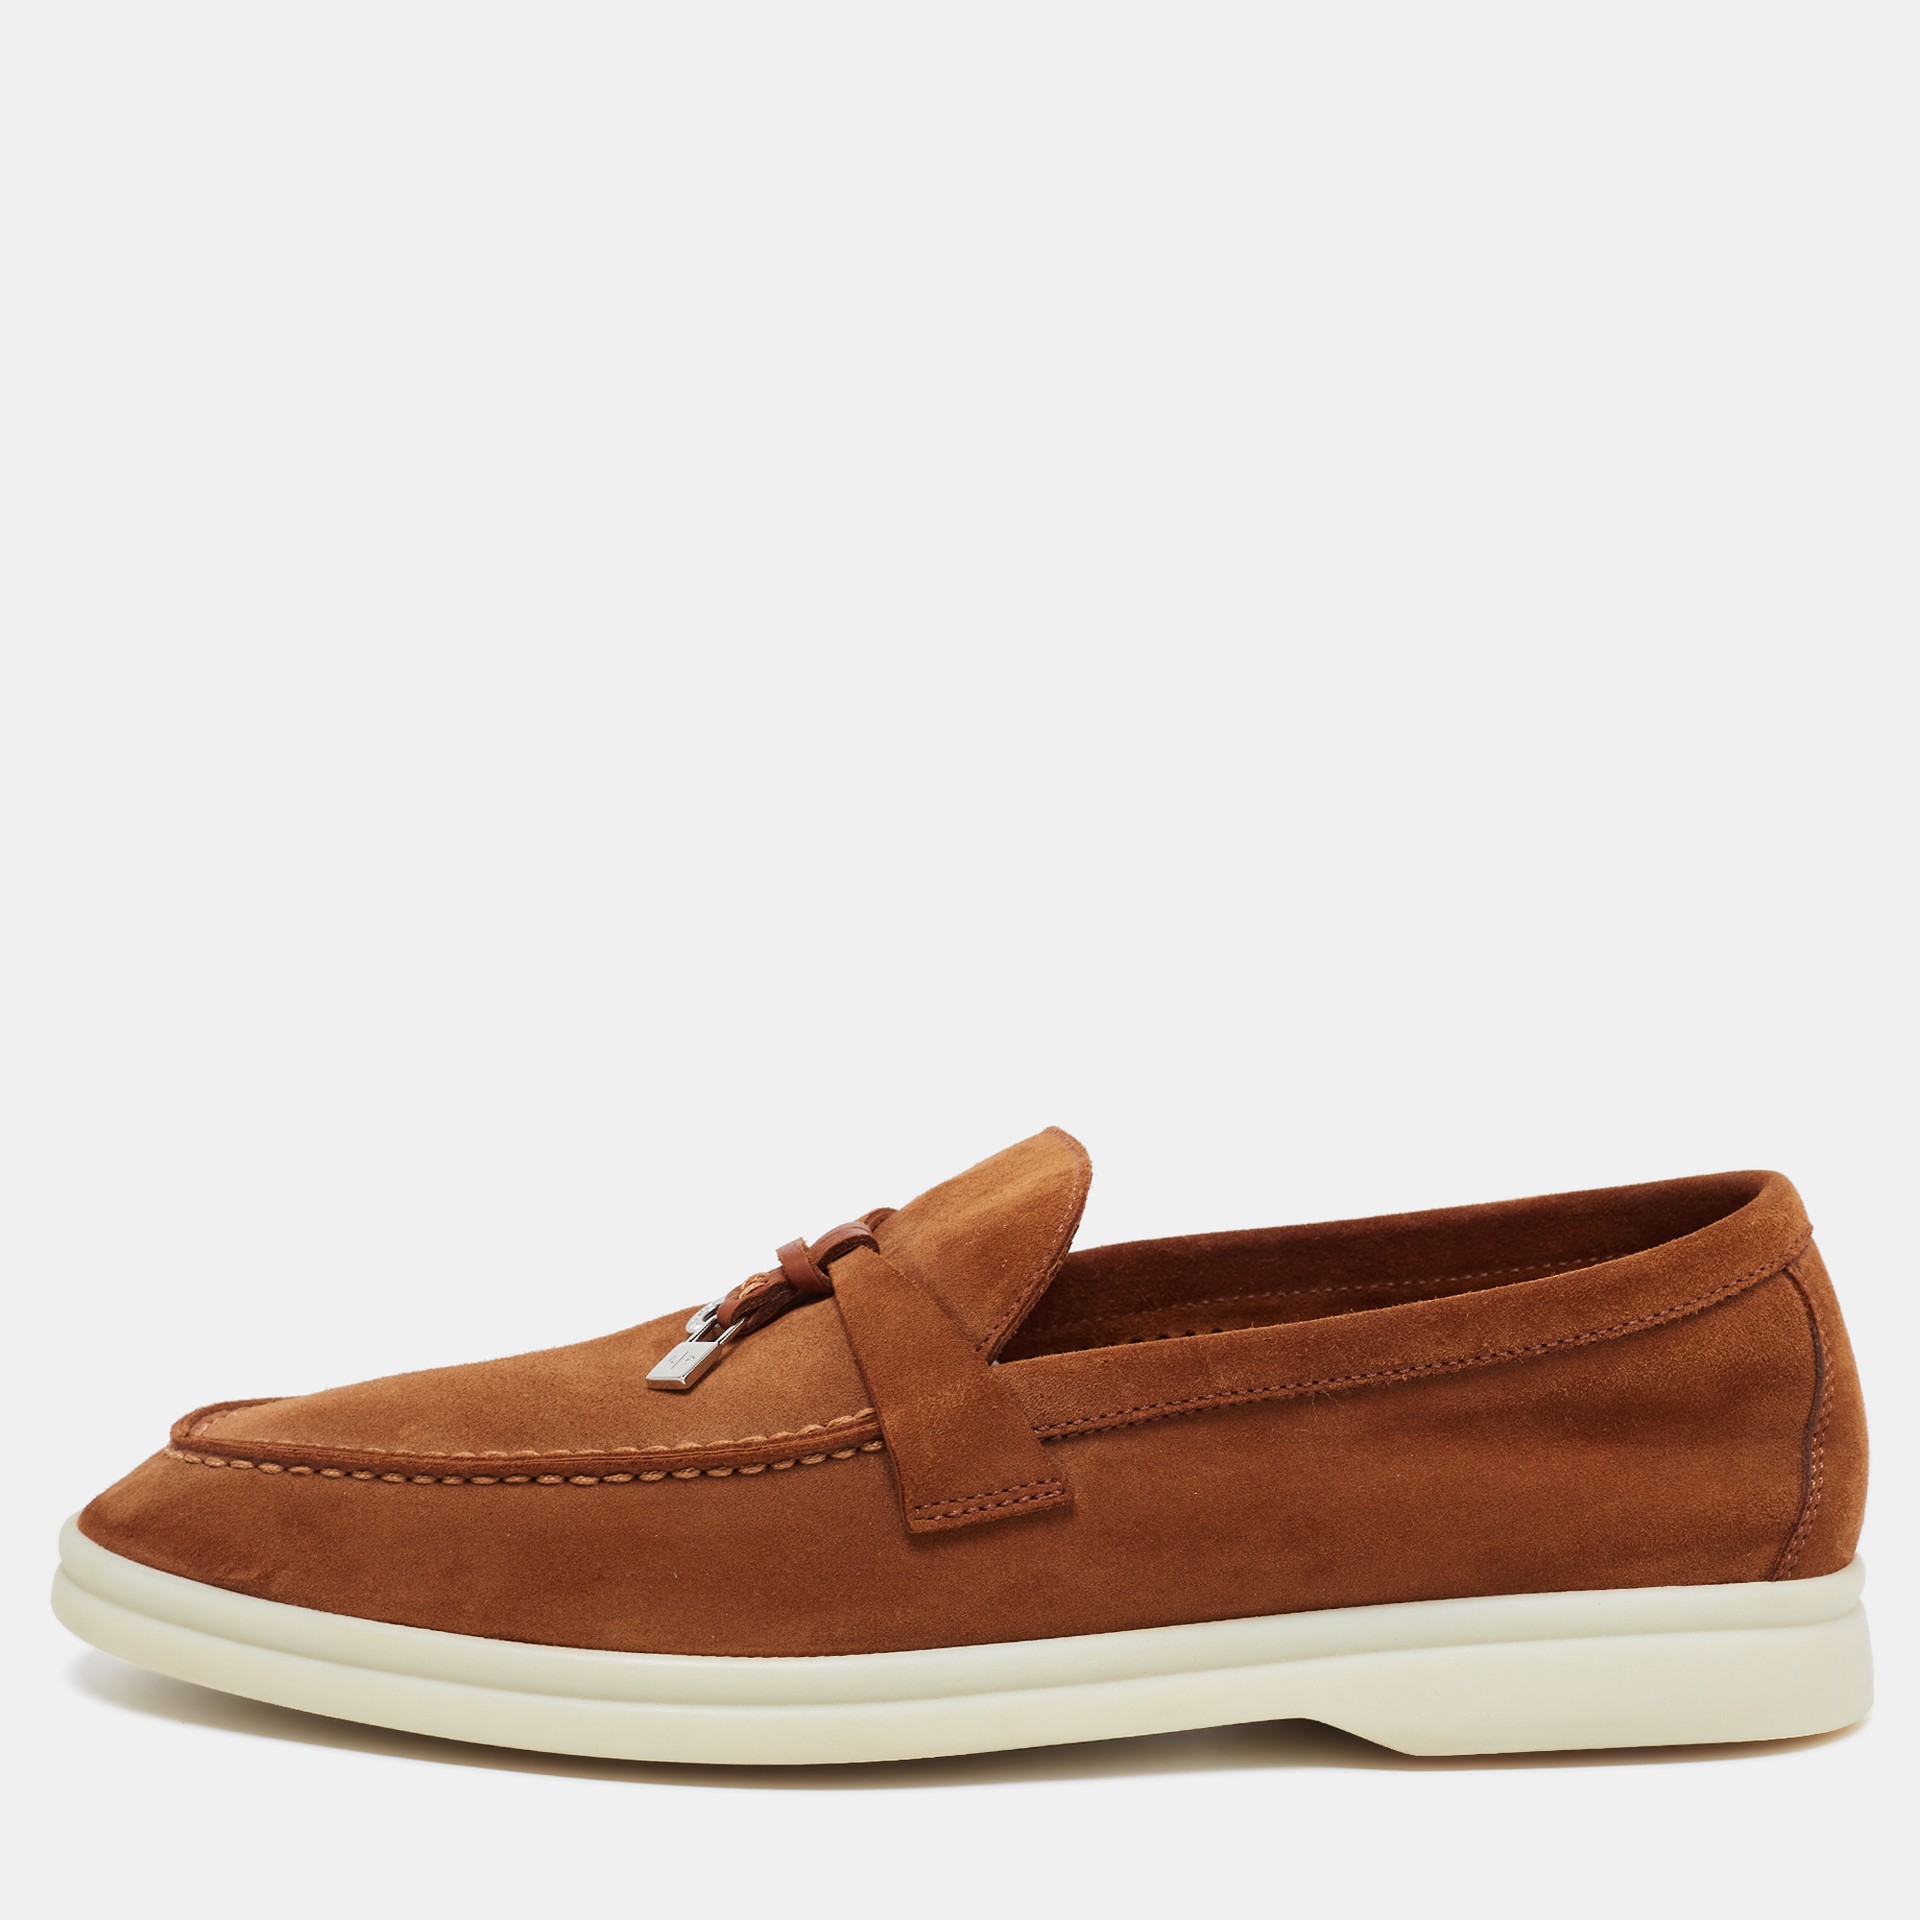 Summer Charms Walk Moccasin Loafers - Brown